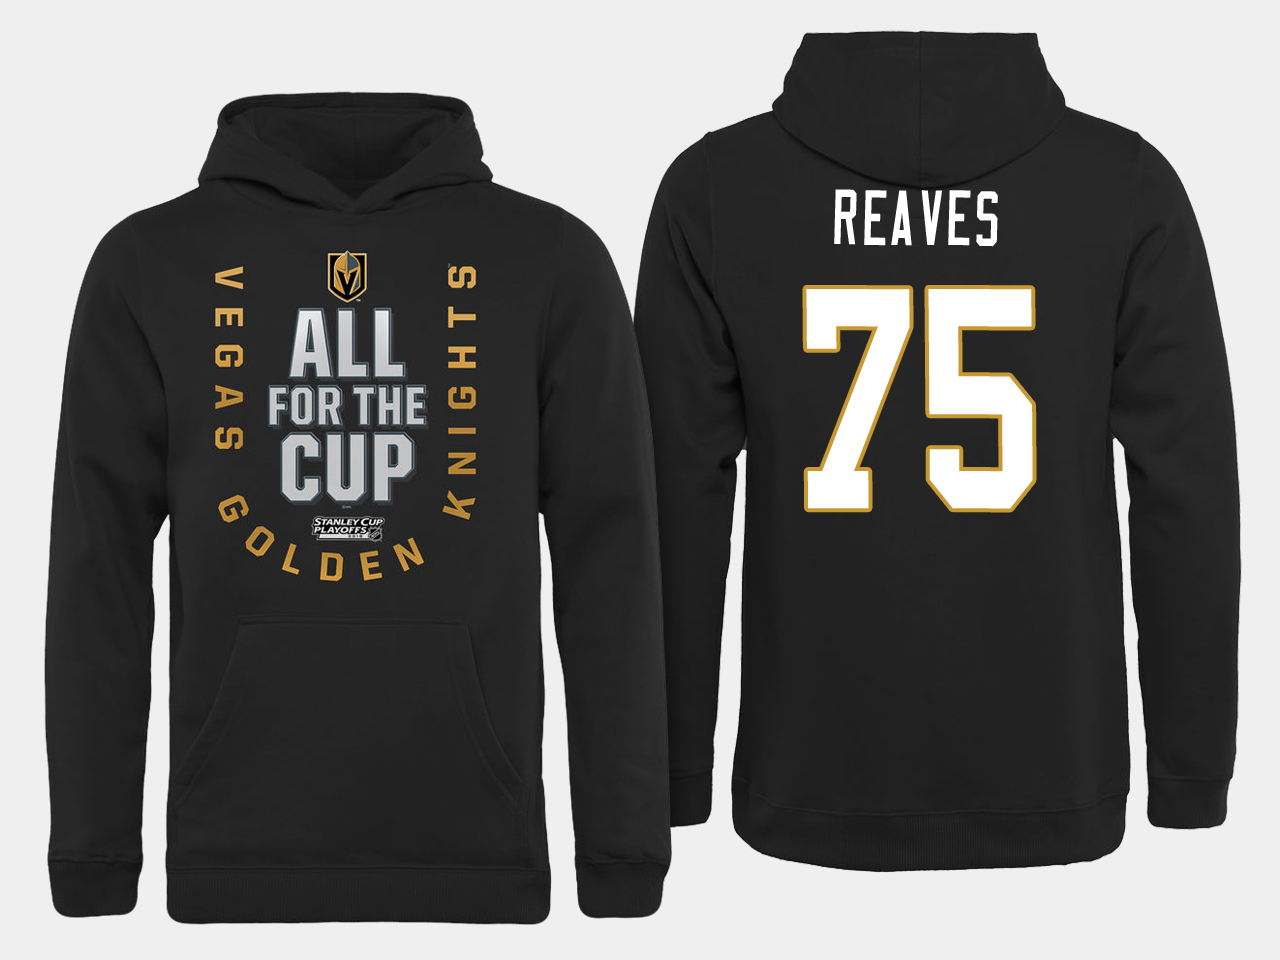 Men NHL Vegas Golden Knights #75 Reaves All for the Cup hoodie->more nhl jerseys->NHL Jersey